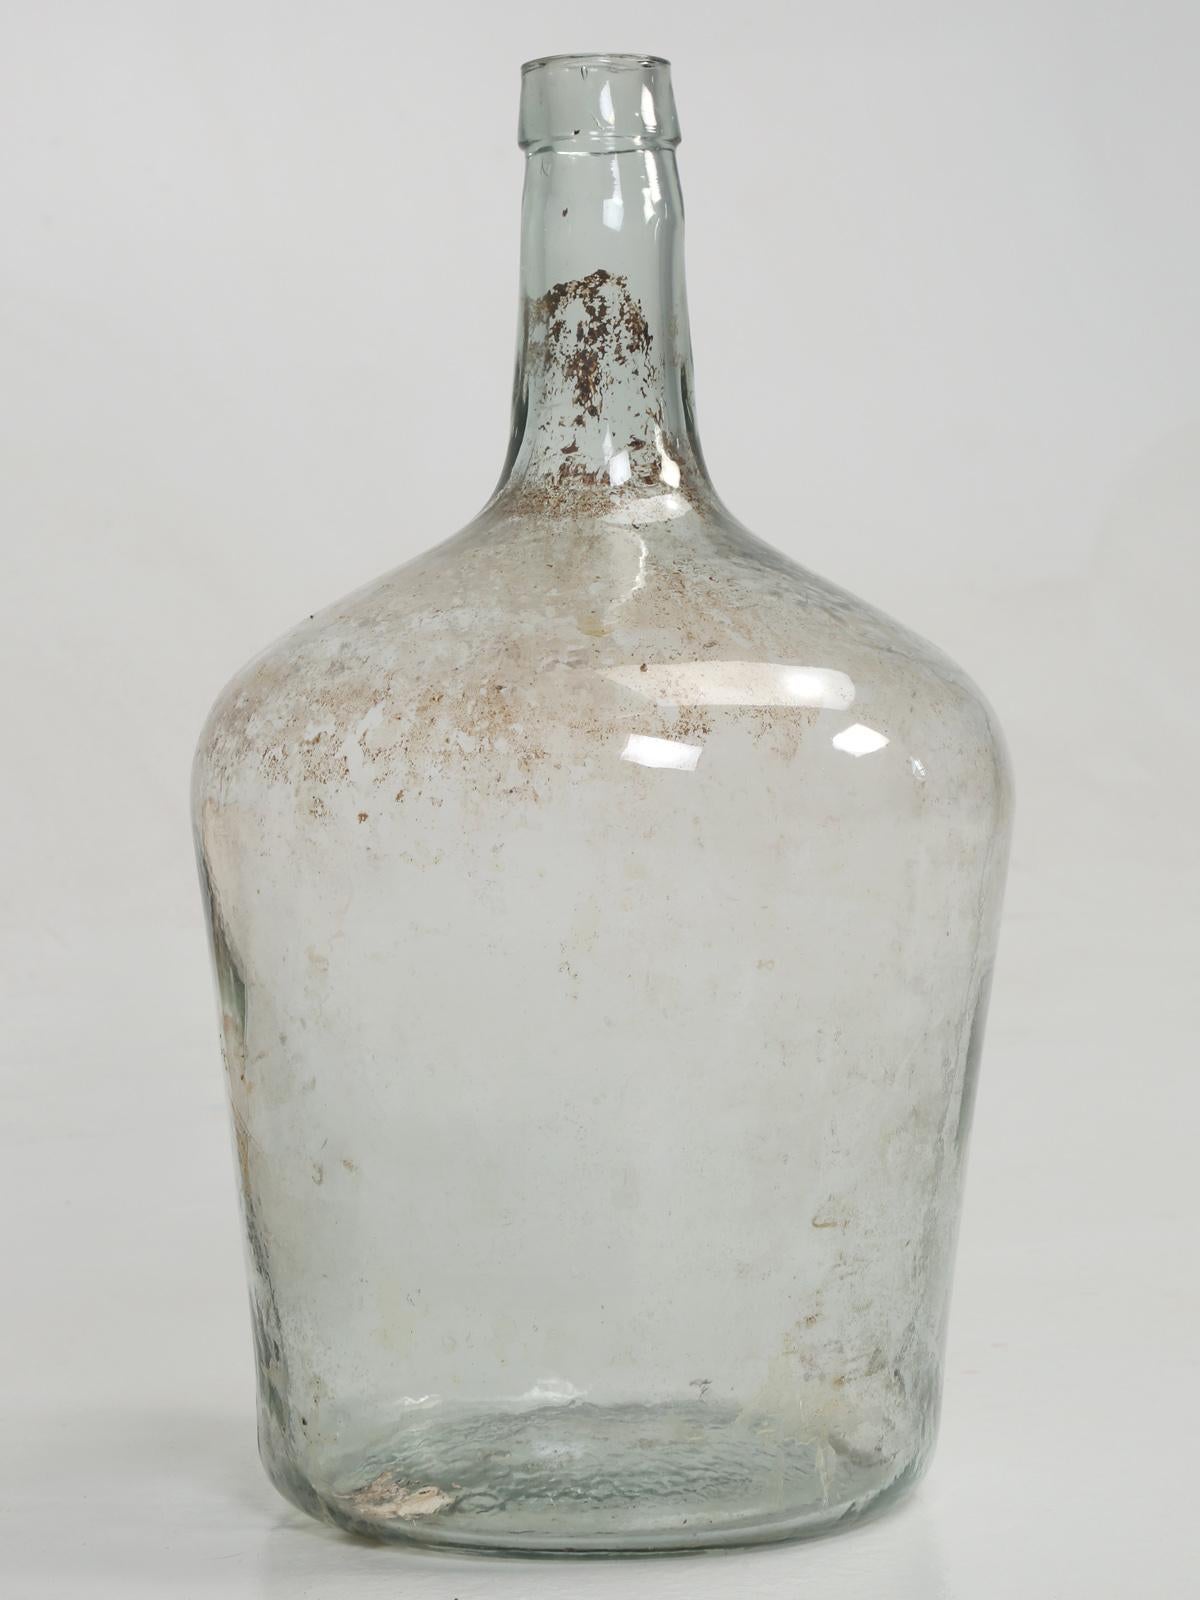 Take your pick, carboy, demijohn or jimmyjohn, they all refer to the same glass vessel. Carboy's originate from the Persian word; qarabah, while demijohn comes courtesy of the French, for dame-jeanne, or Lady Jane and derives from circa 1700.